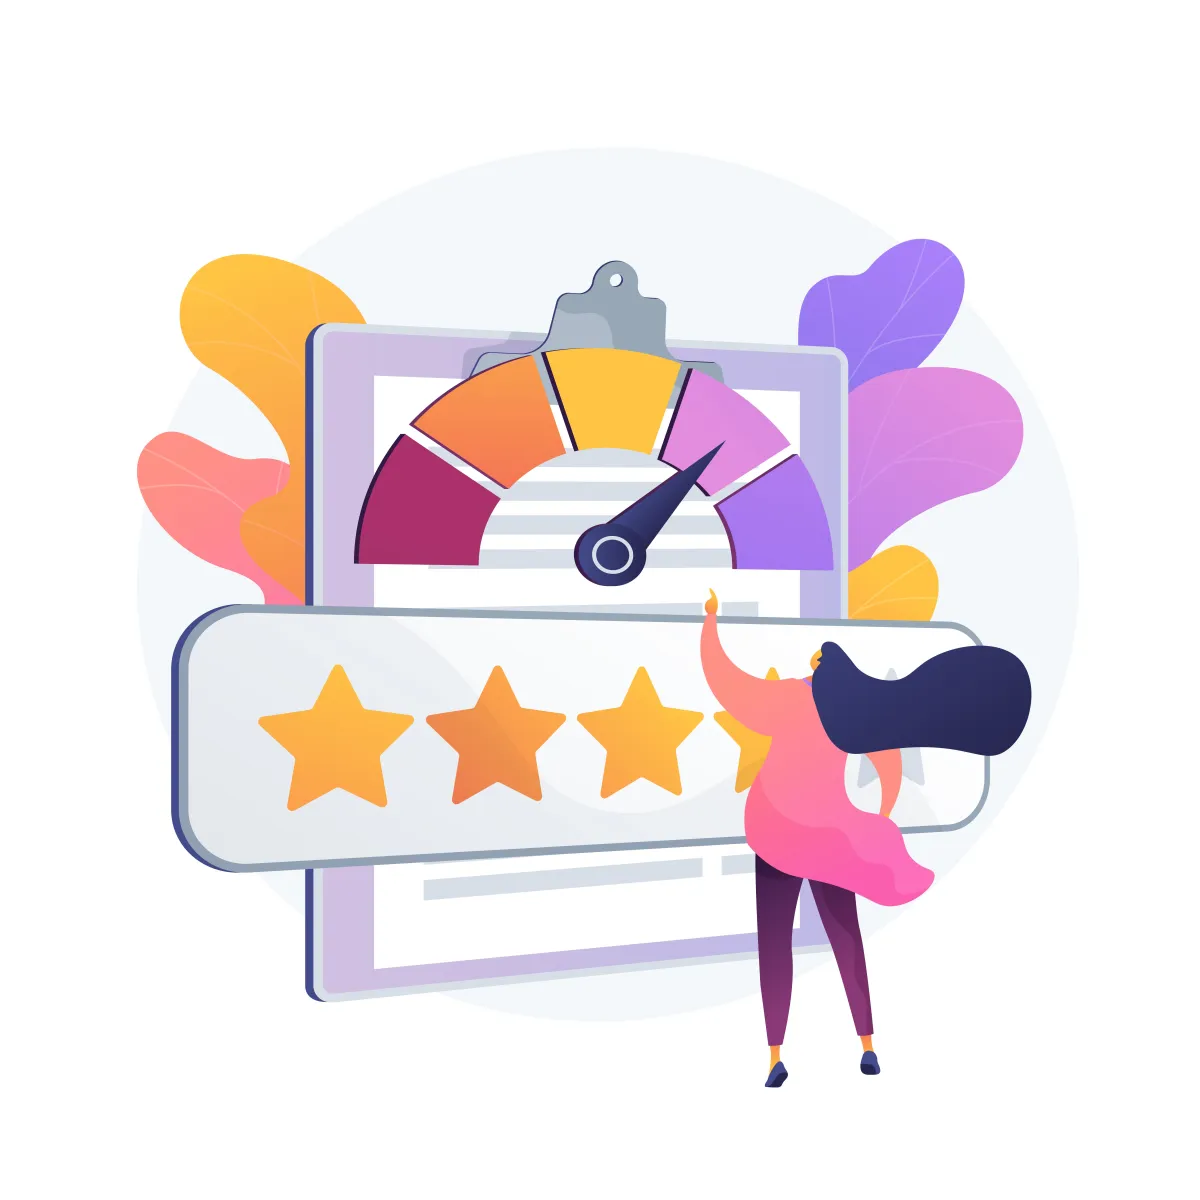 Boost your online reputation with customer reviews.